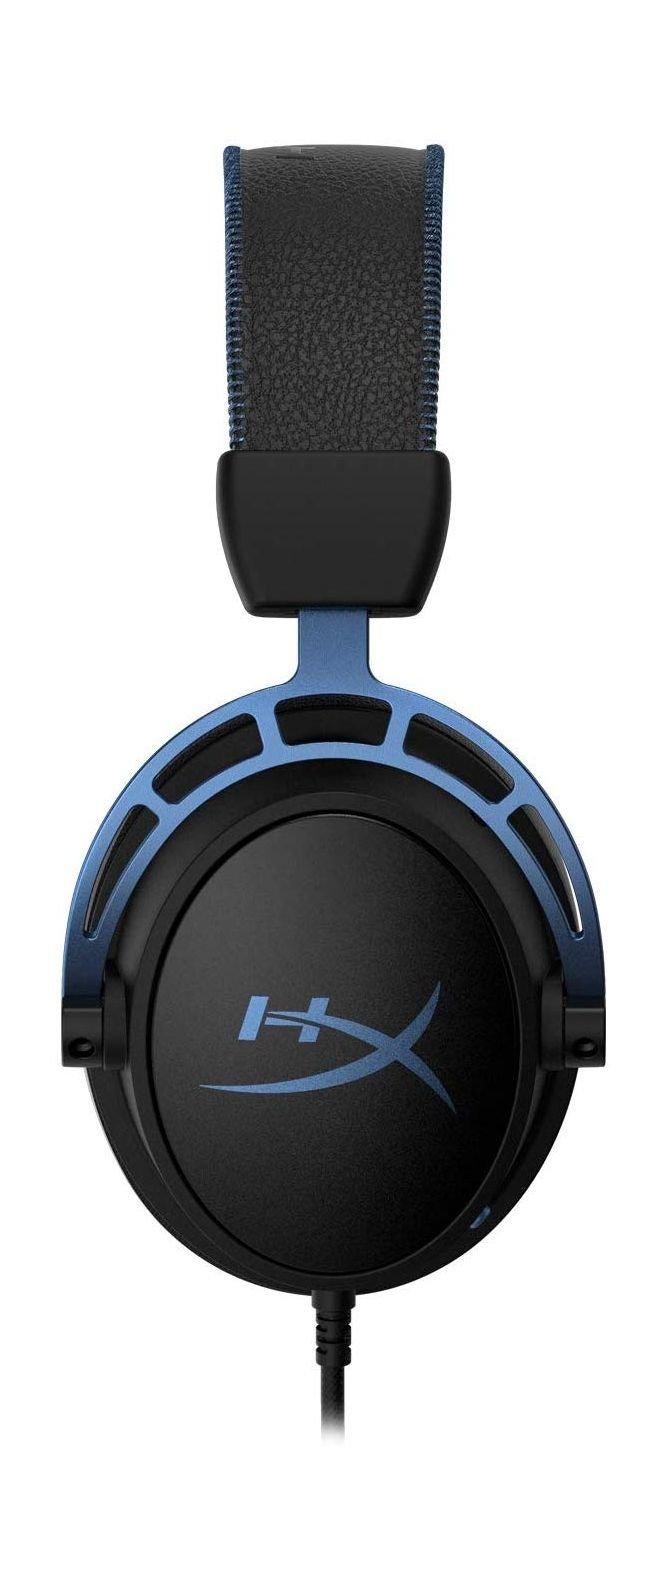 Hyperx Cloud Alpha S Headphone Gaming Price Wired OFF Kuwait, 57% In